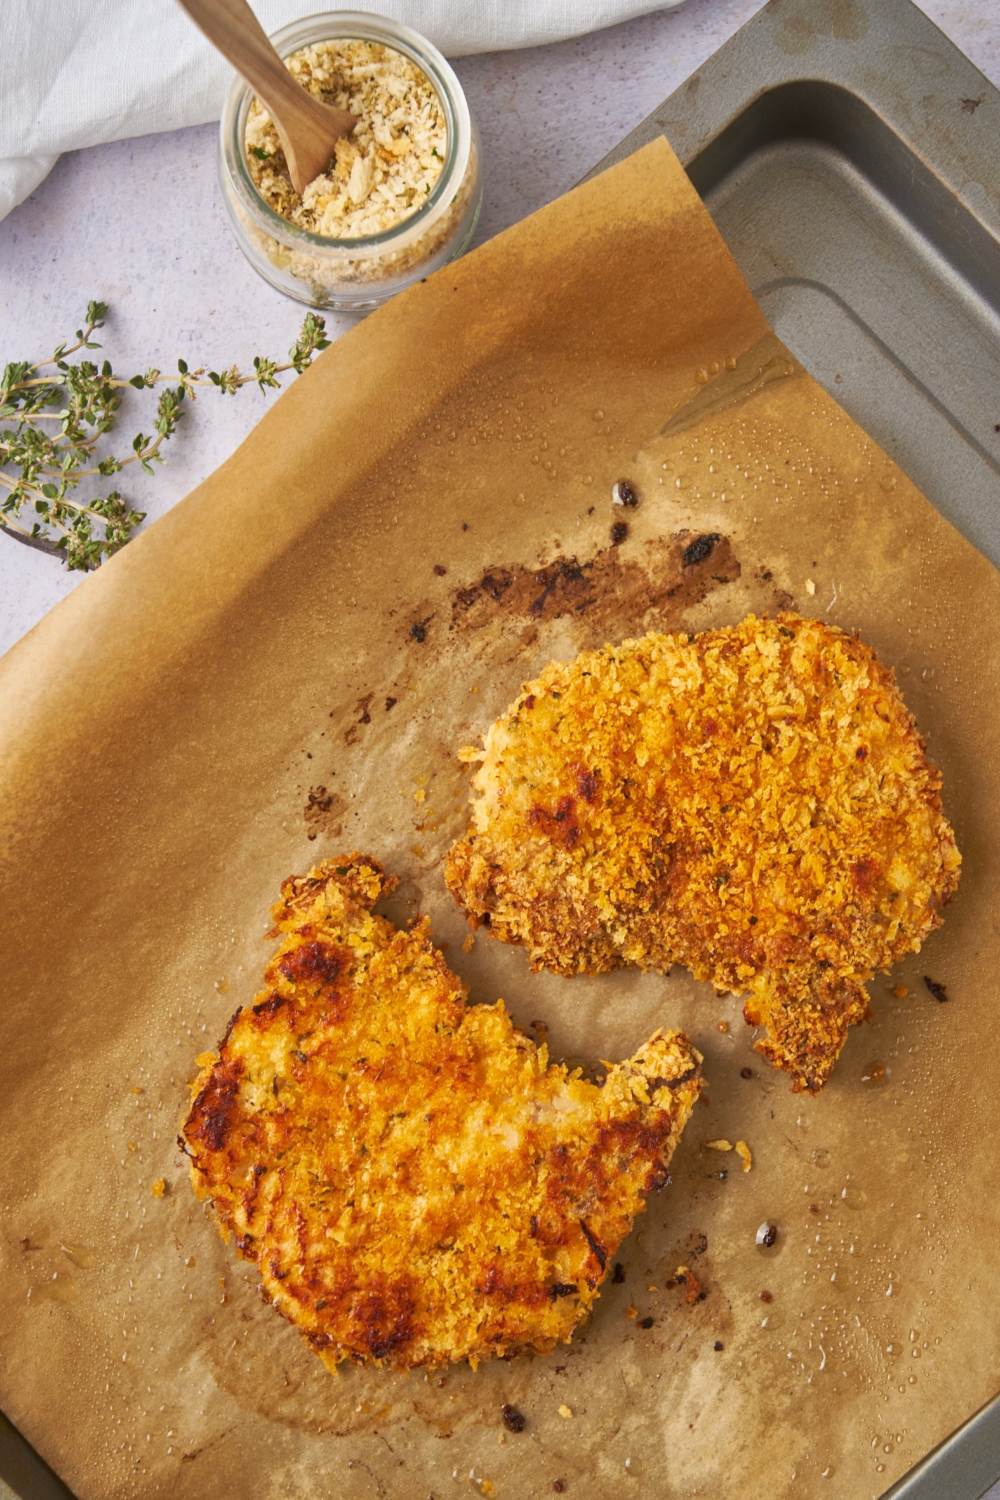 Two golden brown and crispy panko crusted pork chops on a baking sheet lined with parchment paper.